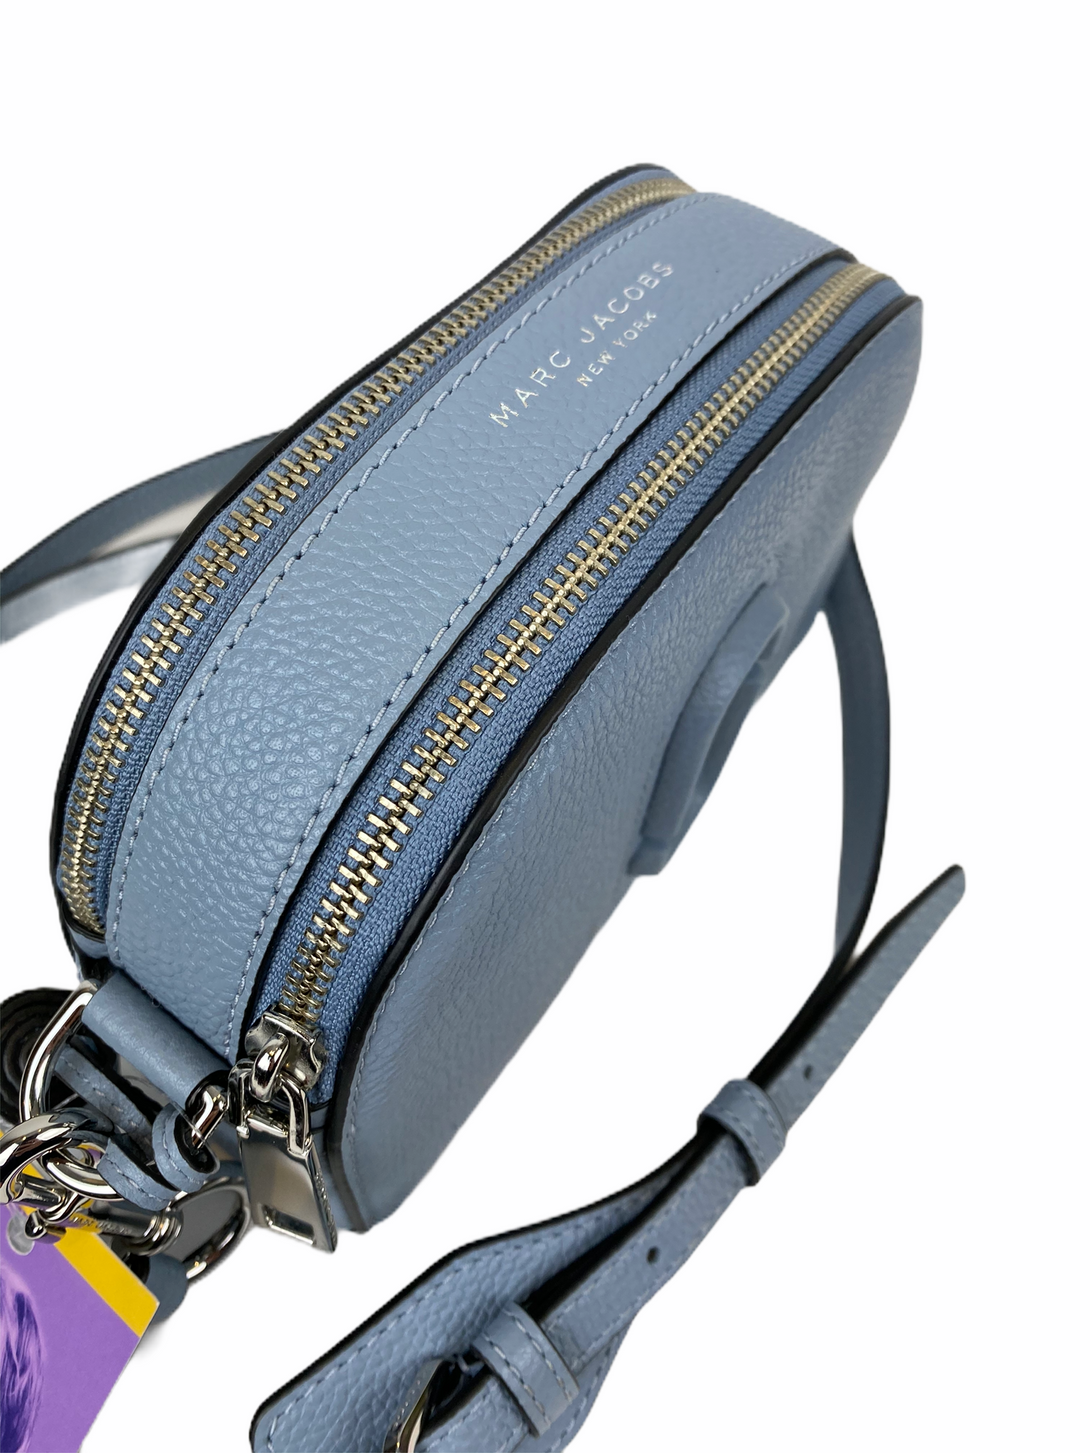 Marc Jacobs Baby Blue Leather Crossbody - As Seen on Instagram 30/08/2020 - Siopaella Designer Exchange